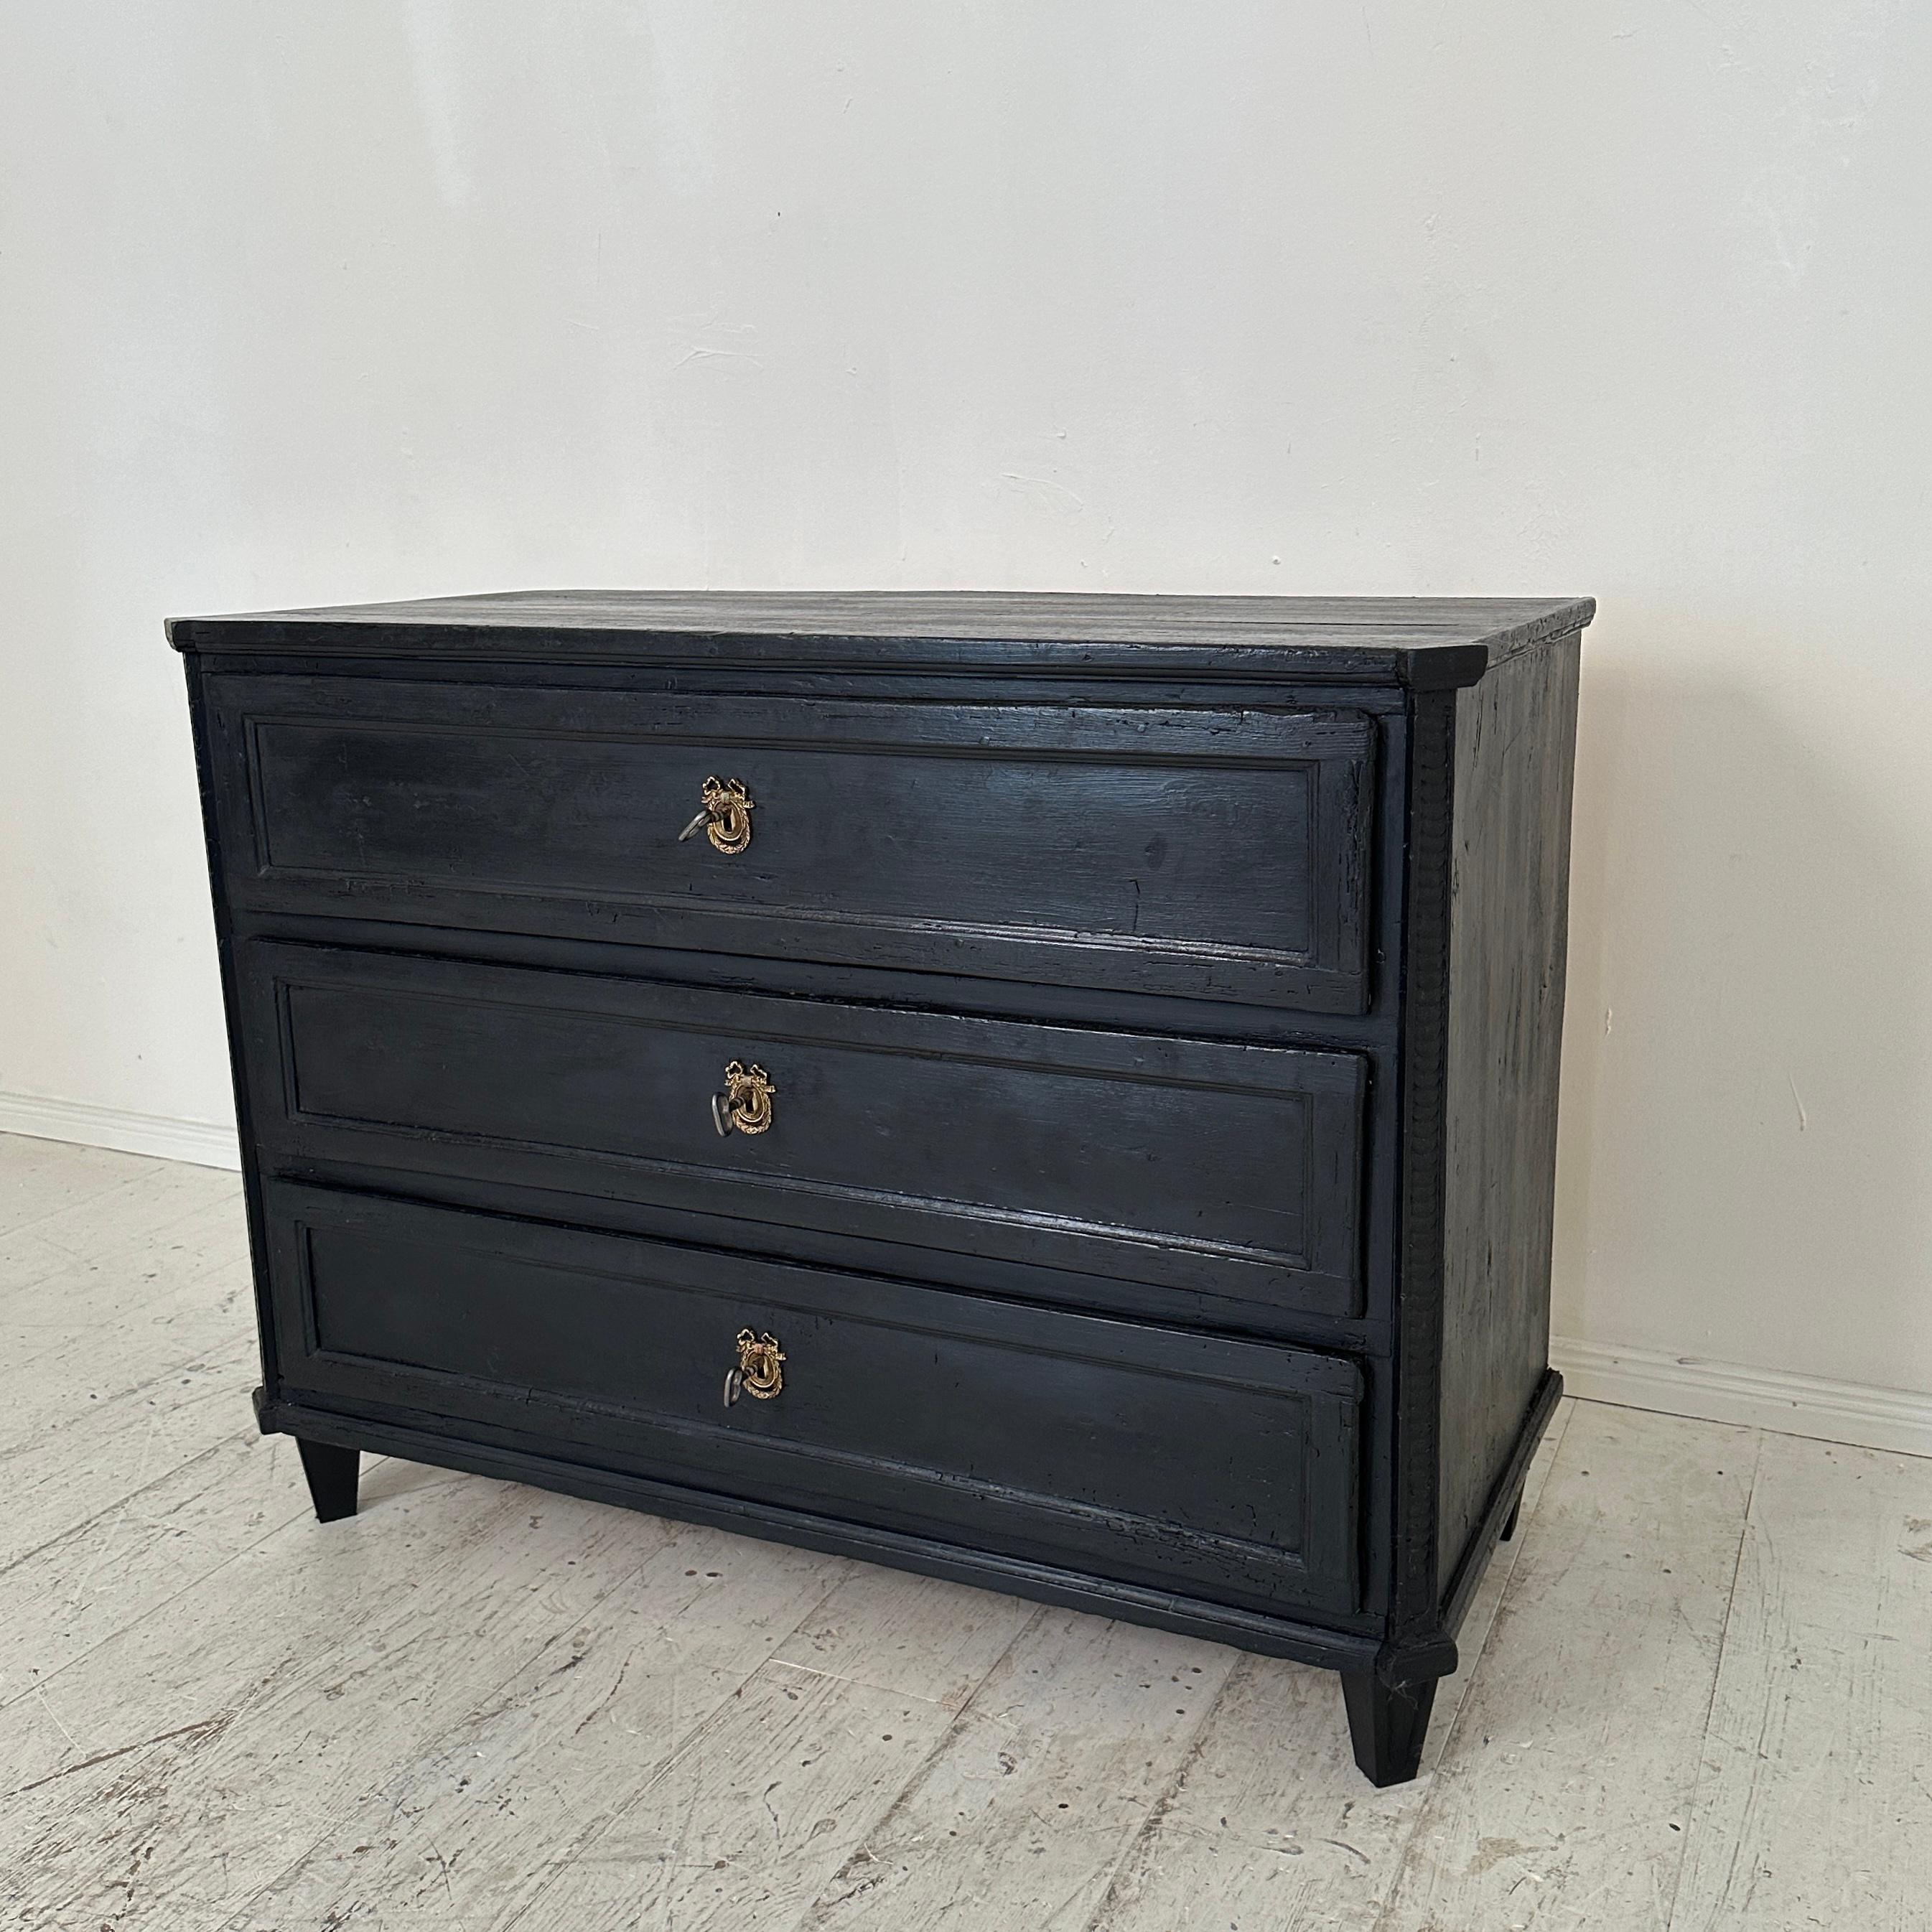 German Early 19th Century Black Empire Chest of Drawers with 3 Drawers, around 1800 For Sale